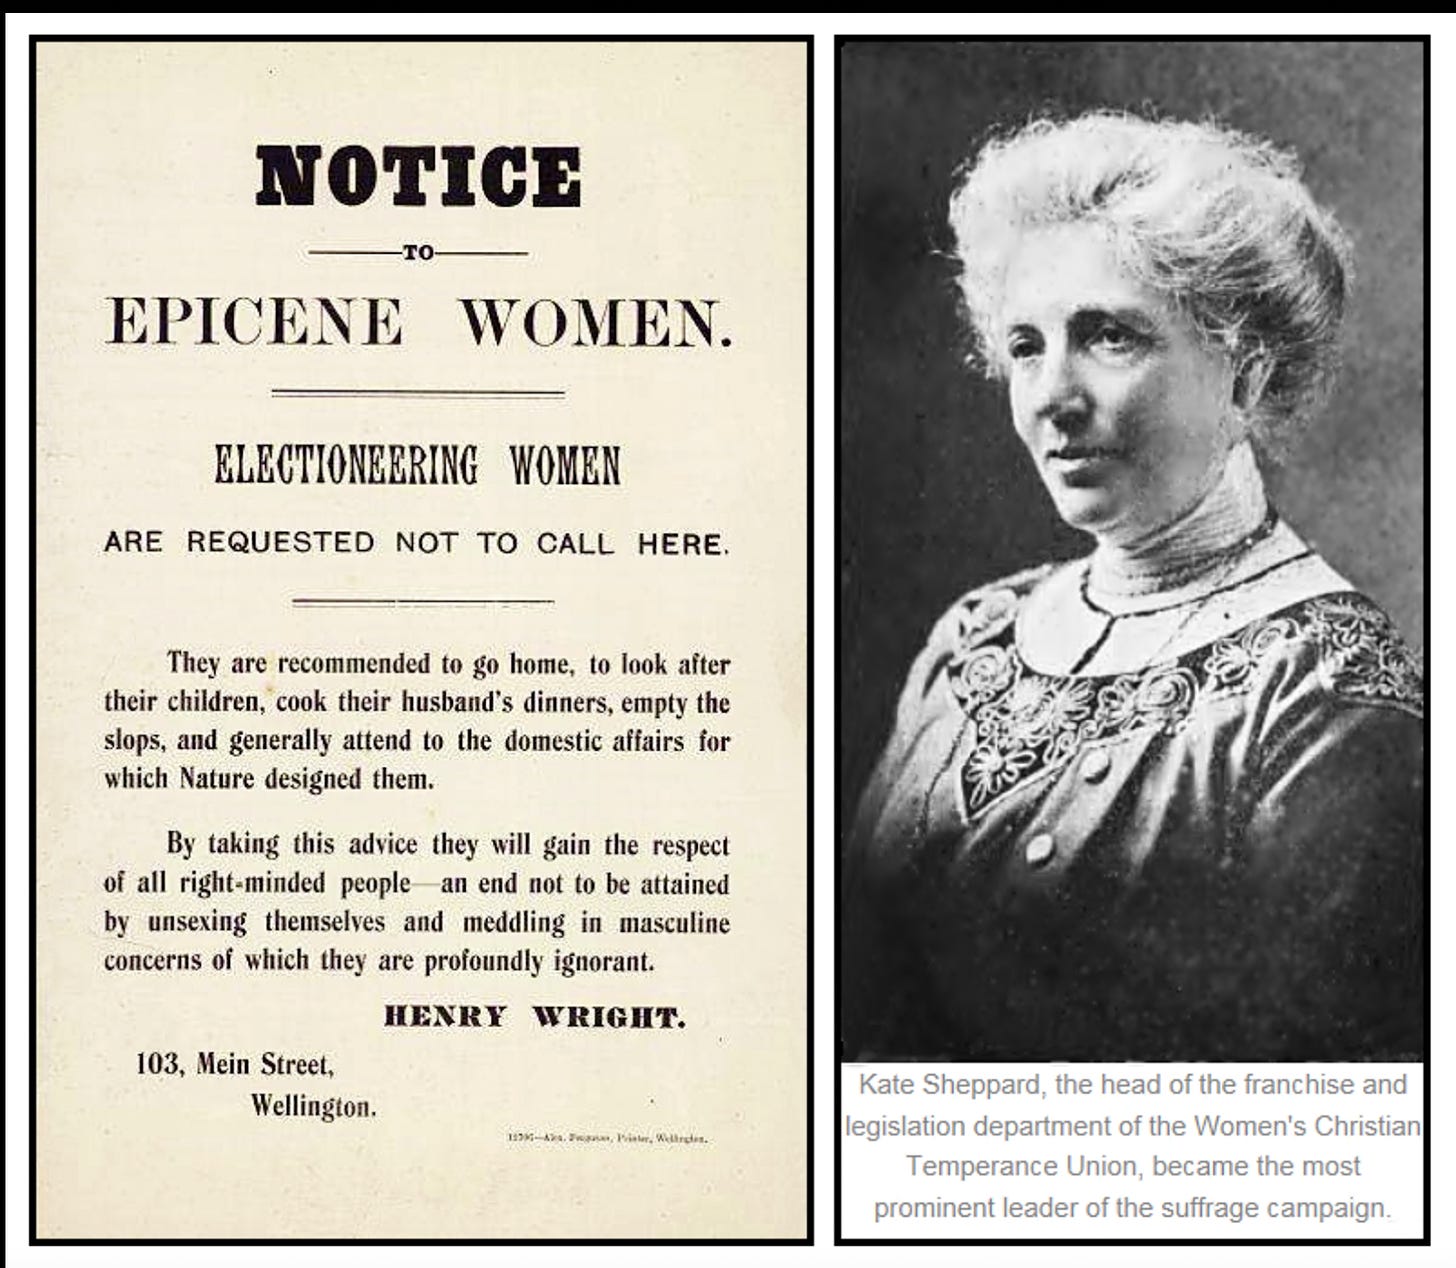 Old newspaper clipping saying “Notice to epicene women. Electioneering women are not requested to call here. They are recommended to go home, to look after their children [..] By taking this advice they will gain the respect of all right-minded people.” next to a photo of Kate Sheppard.